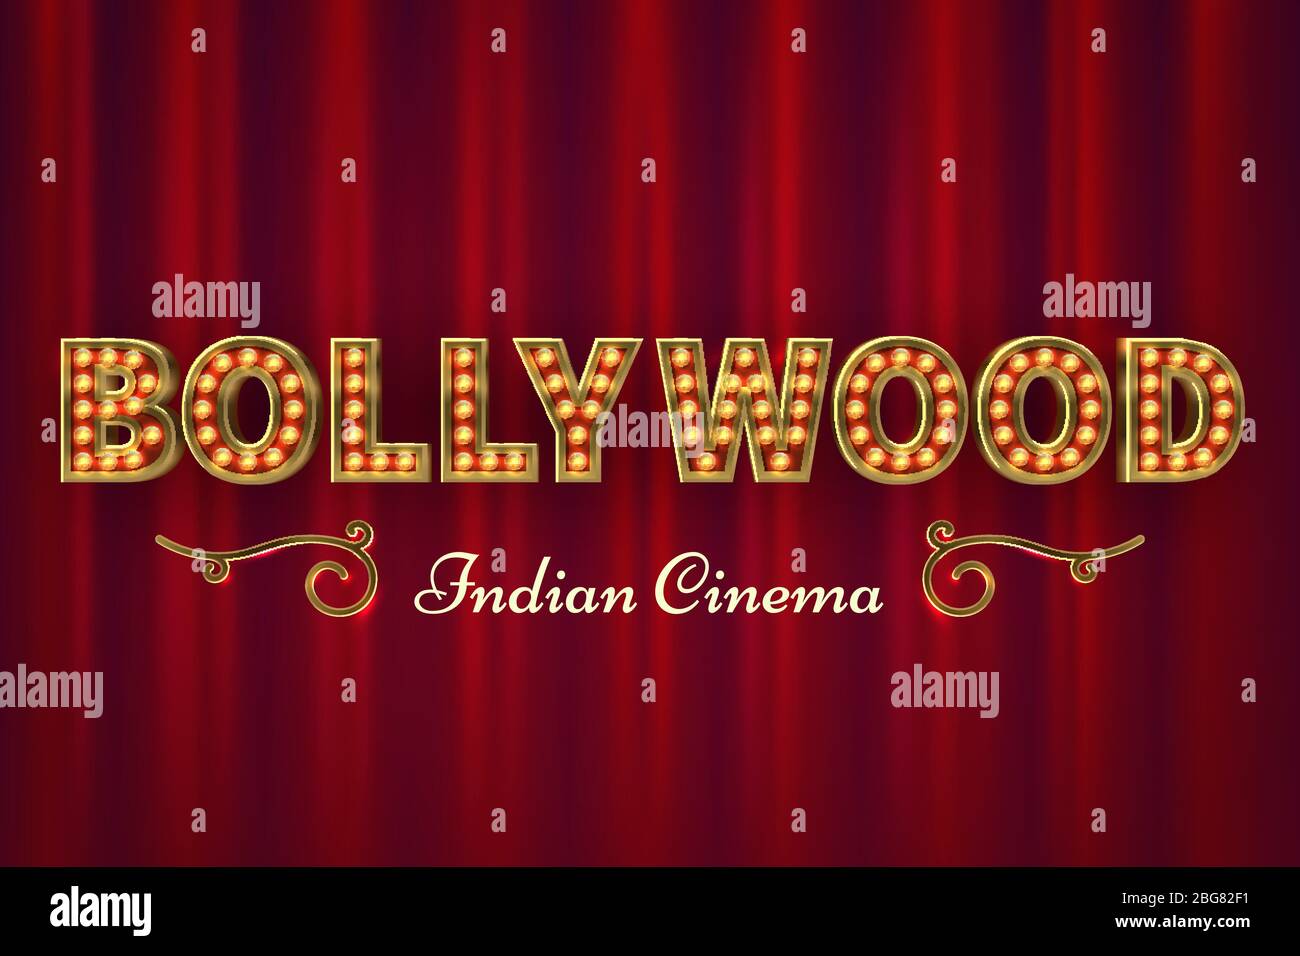 Bollywood cinema poster. Vintage indian classic movie vector background with red curtains. Illustration of lettering bollywood india, cinematography e Stock Vector